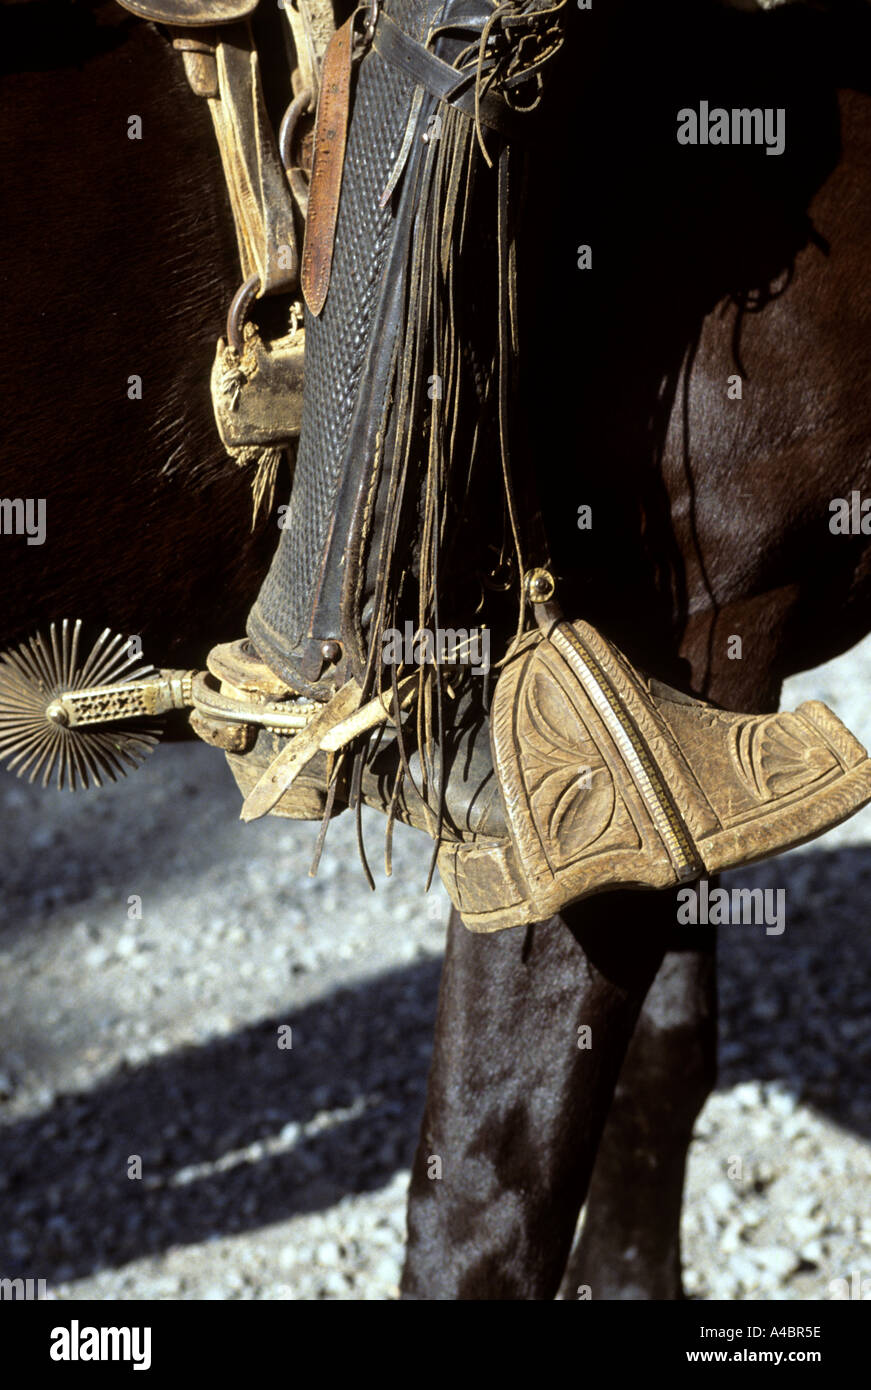 Southern Chile. Traditional old-fashioned carved wooden stirrups, spurs and embossed leather leg guard worn by a gaucho. Stock Photo